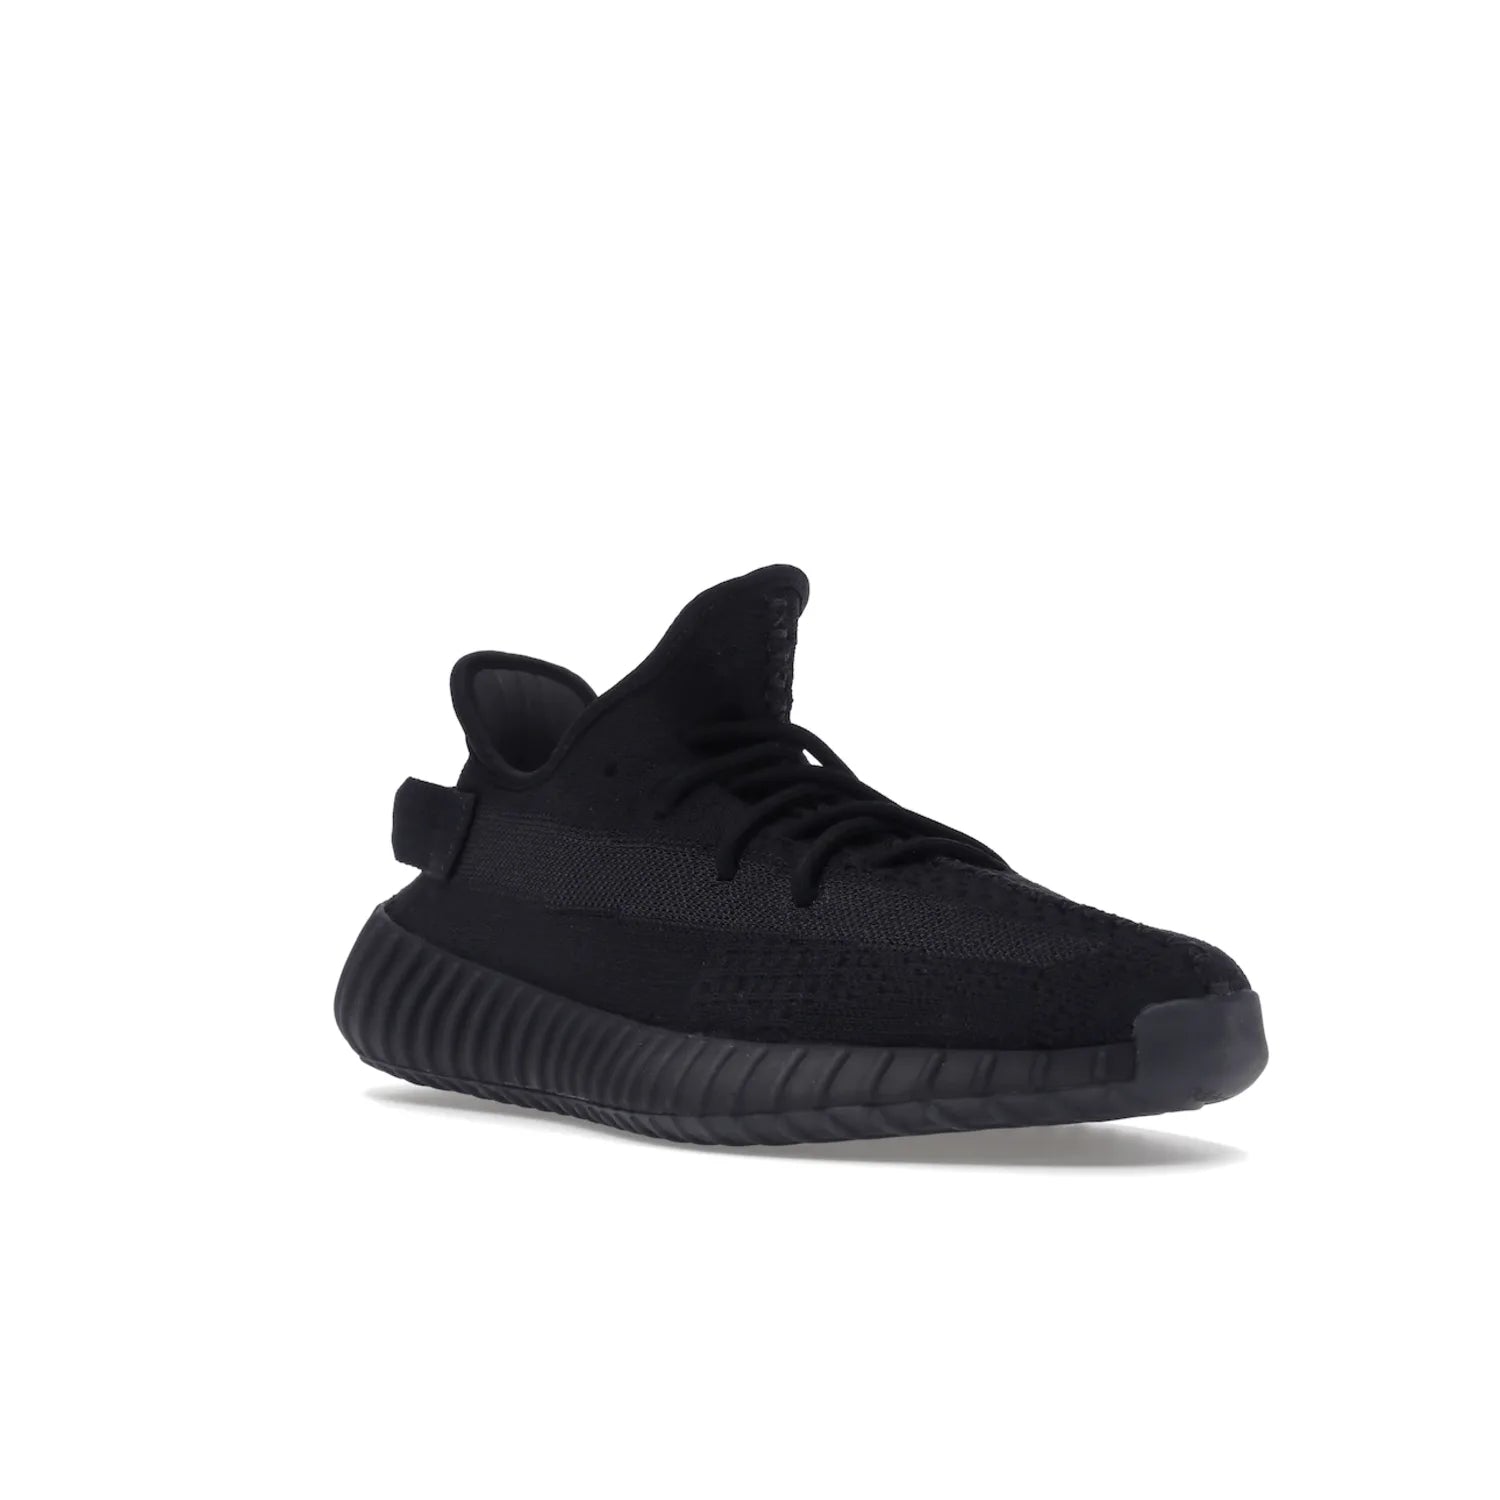 adidas Yeezy Boost 350 V2 Onyx - Image 6 - Only at www.BallersClubKickz.com - Adidas Yeezy Boost 350 V2 Onyx Triple Black shoes for comfort and style. Arriving Spring 2022.